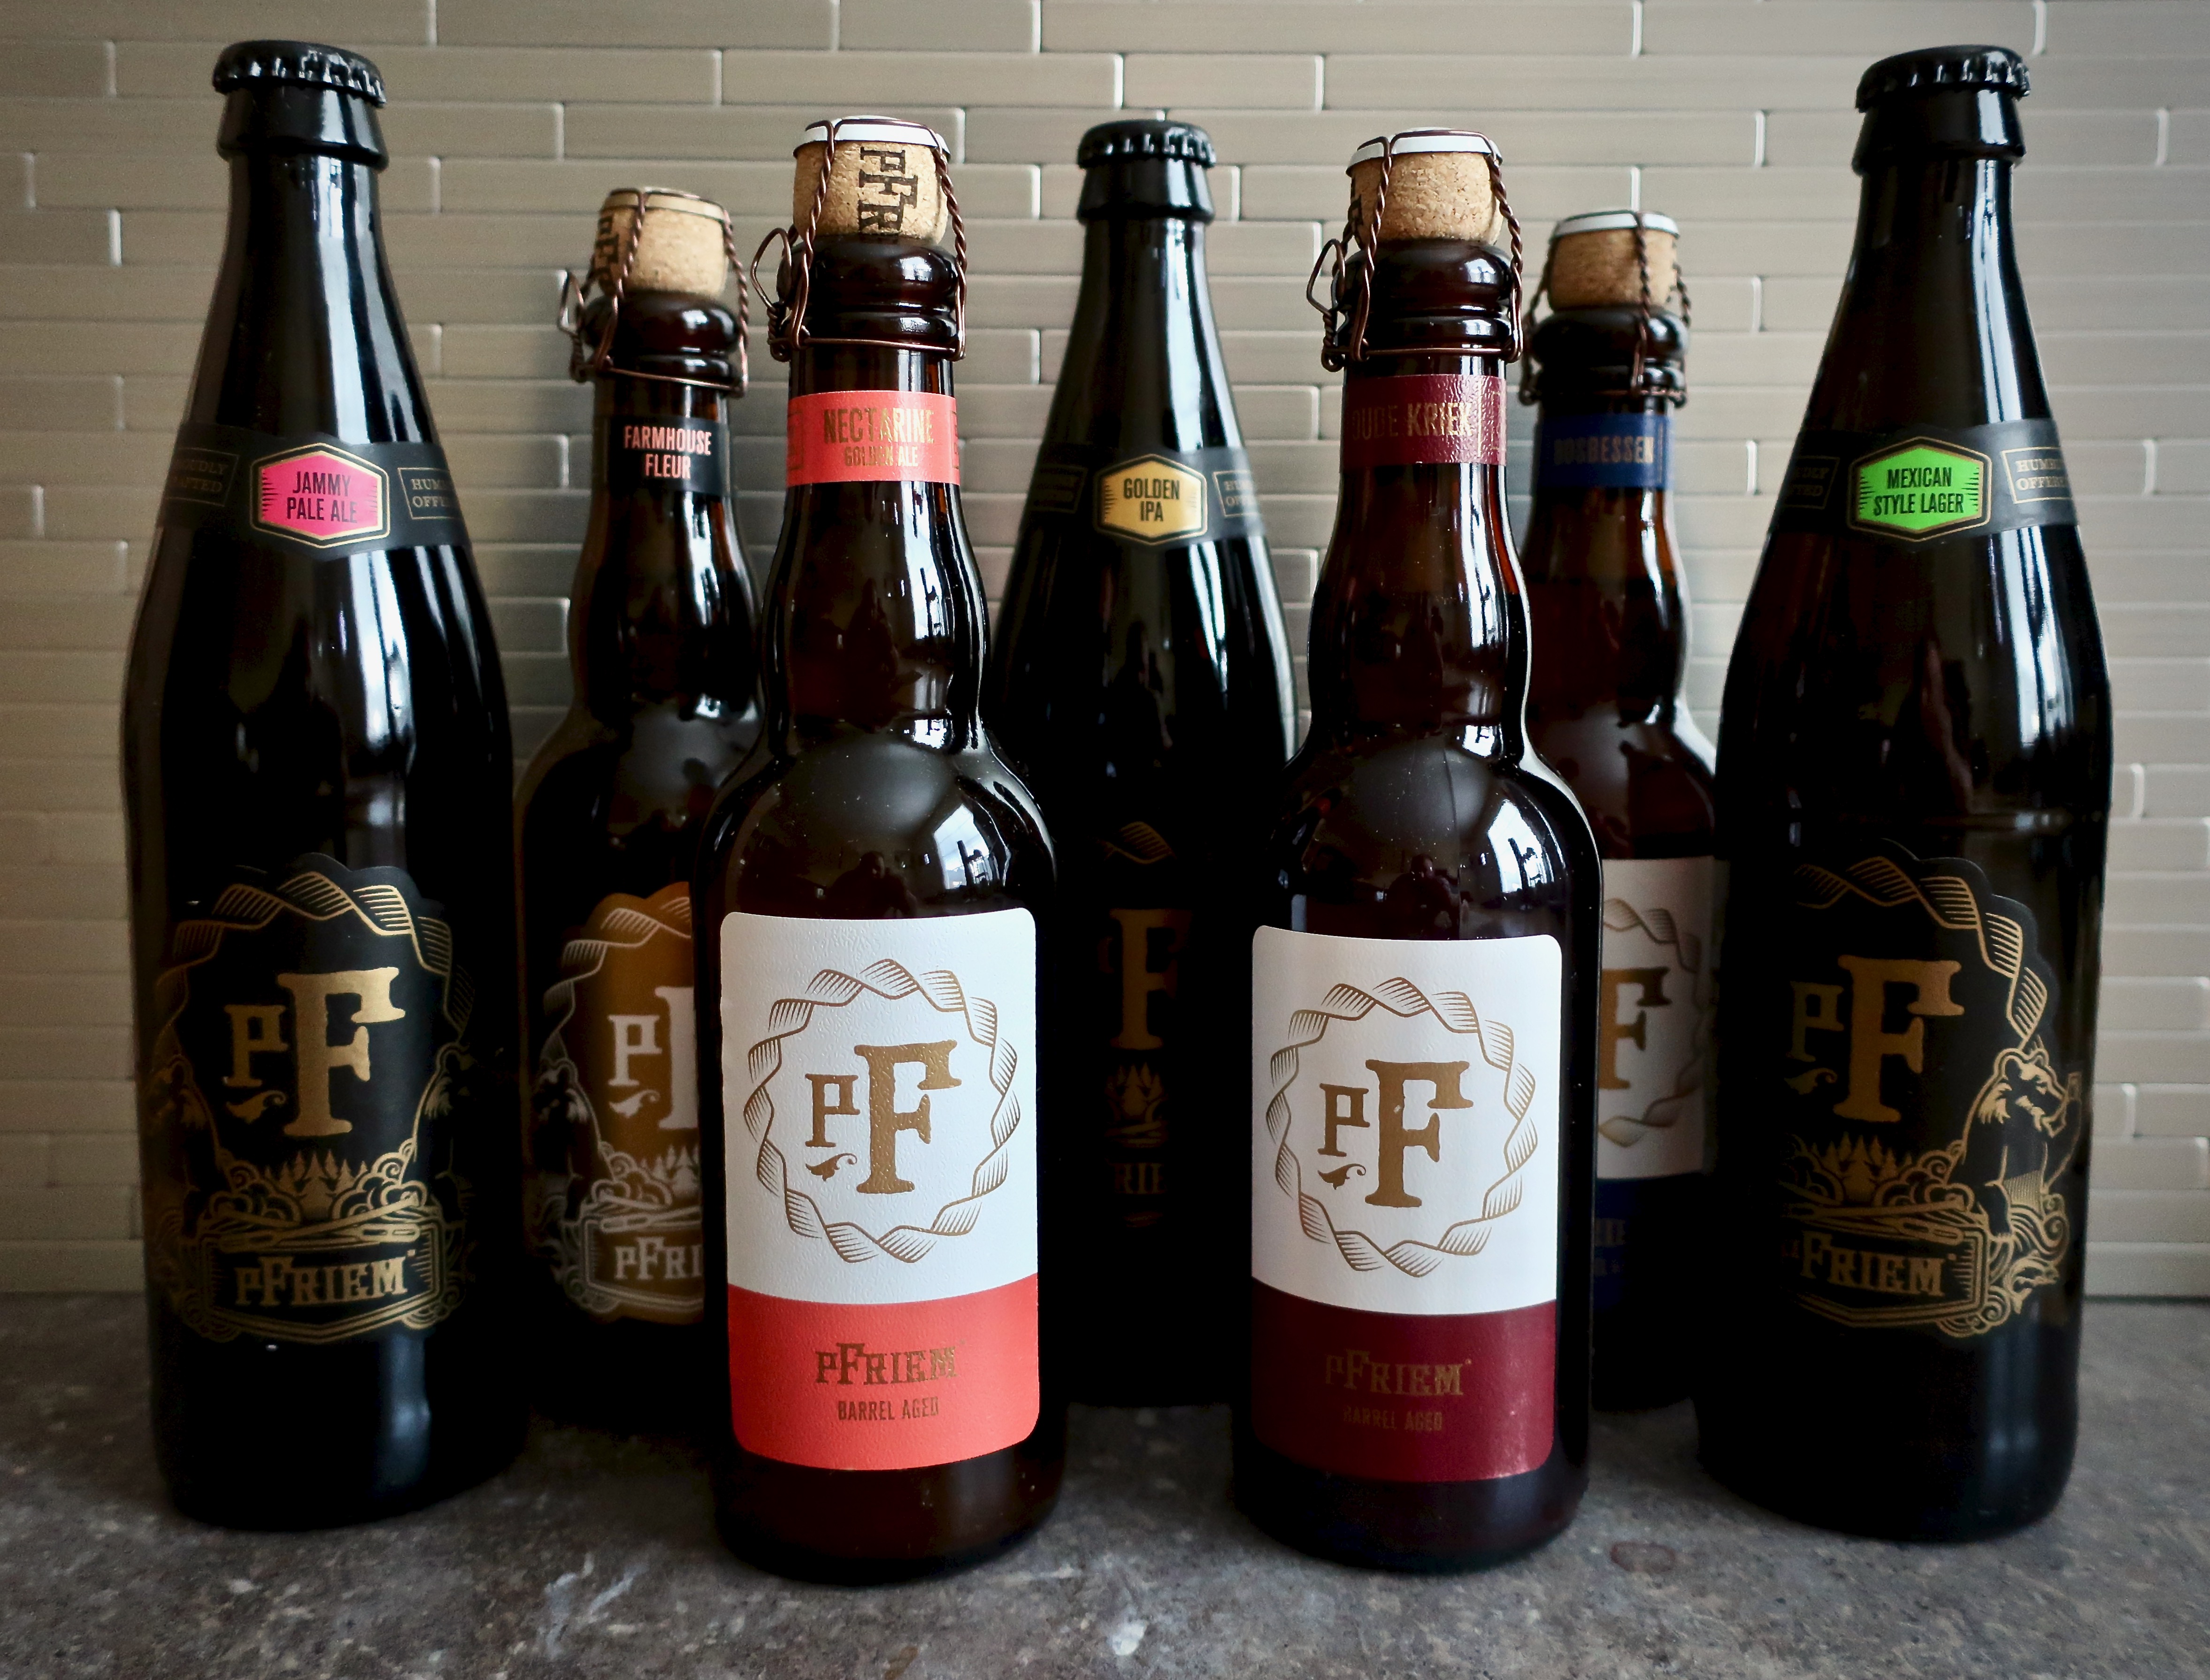 pFriem Family Brewers Summer 2019 Beer Releases - Mexican Lager, Golden IPA, Jammy Pale, Farmhouse Fleur, Nectarine Golden Ale, Bosbessen, and Oude Kriek.